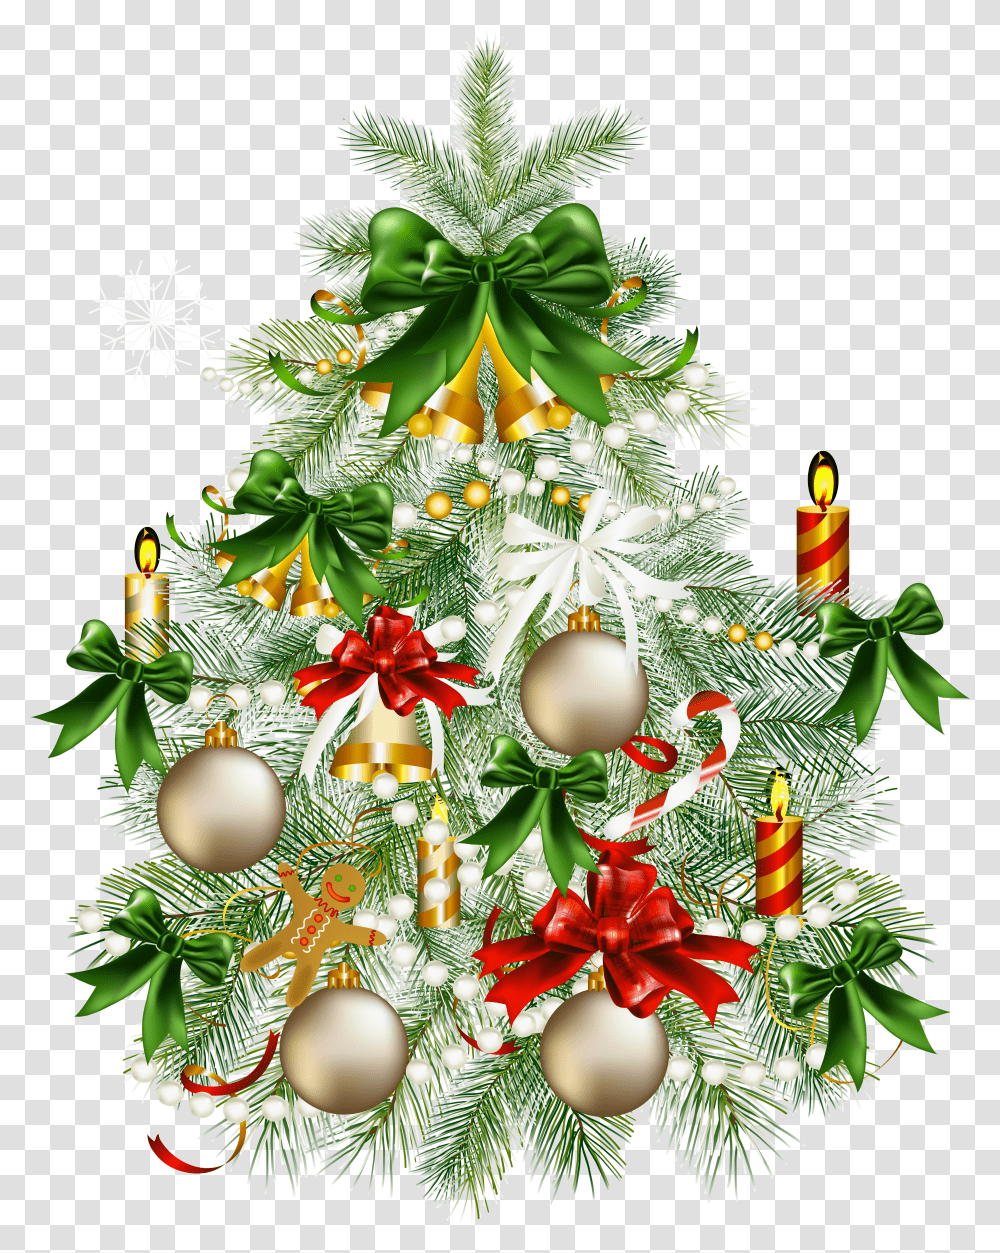 With Snowy Tree Christmas Free Hd Image Transparent Png